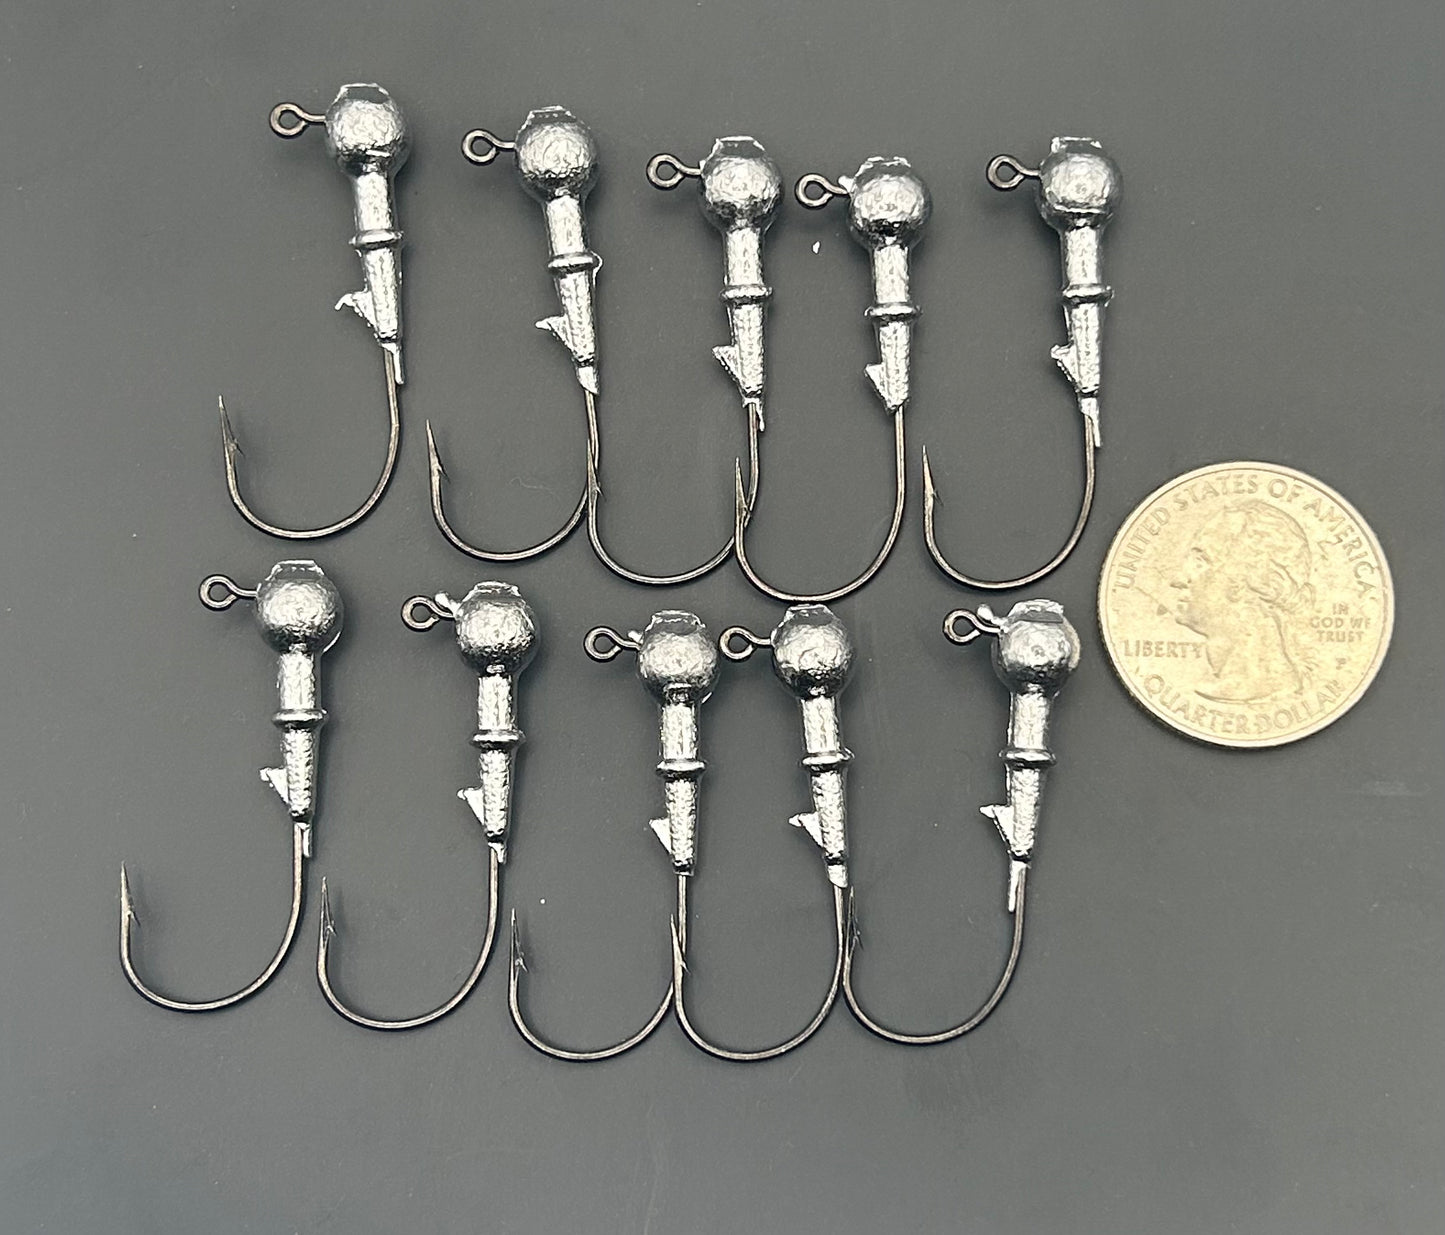 25 Ct. Of 1/32, 1/16, 1/8, and 3/8 oz Jig Heads